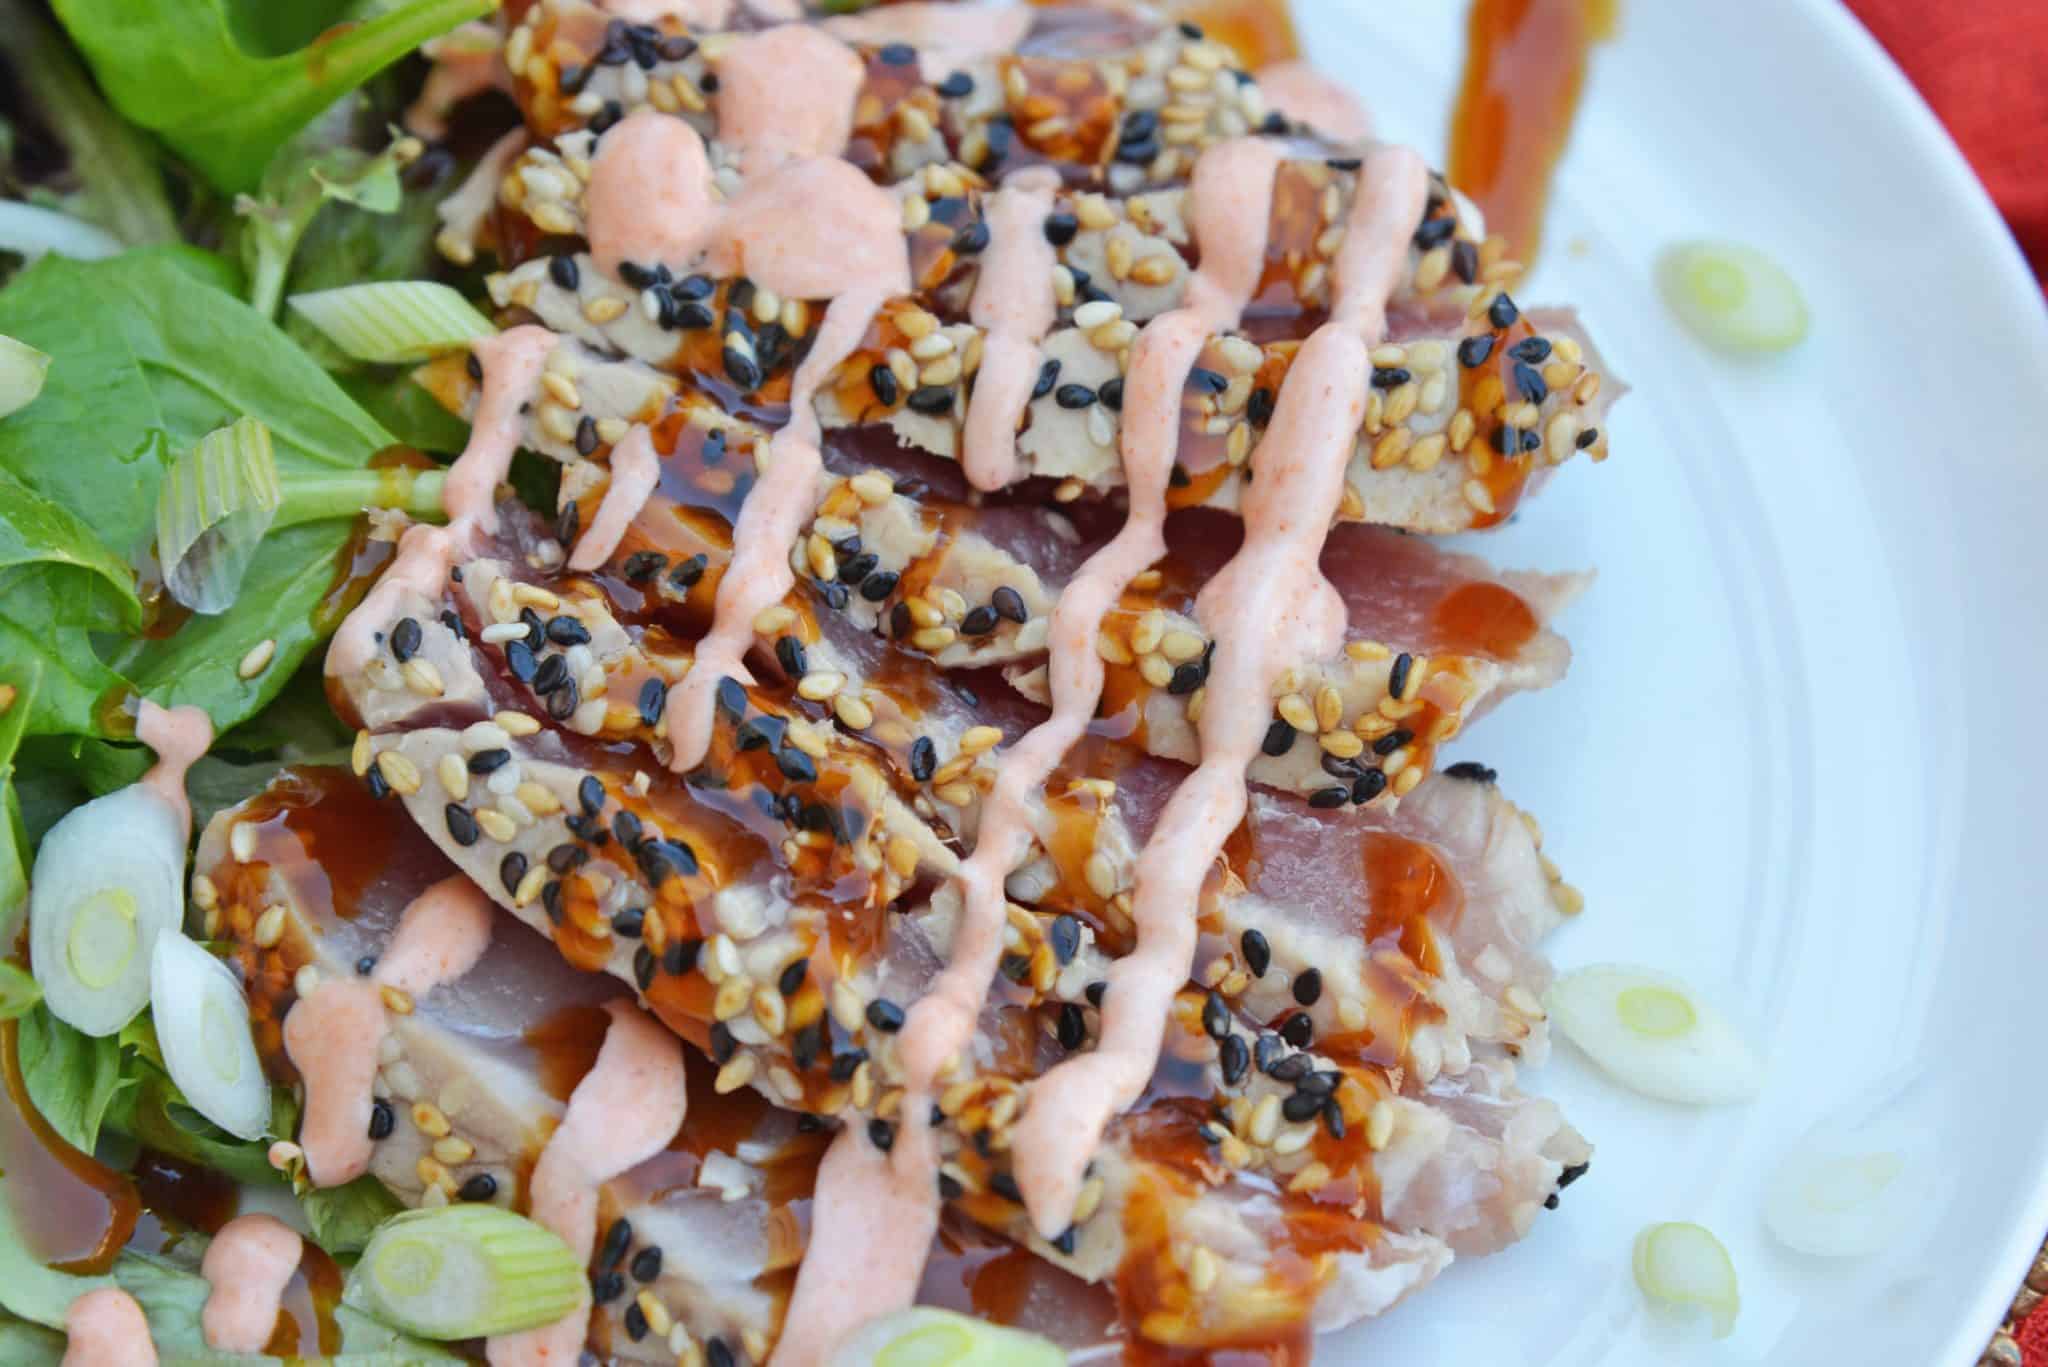 This Teriyaki Tuna recipe brings a delicious and healthy meal to the table in just over 20 minutes! This ahi tuna recipe is a quick and easy meal! #teriyakituna #tunarecipes www.savoryexperiments.com